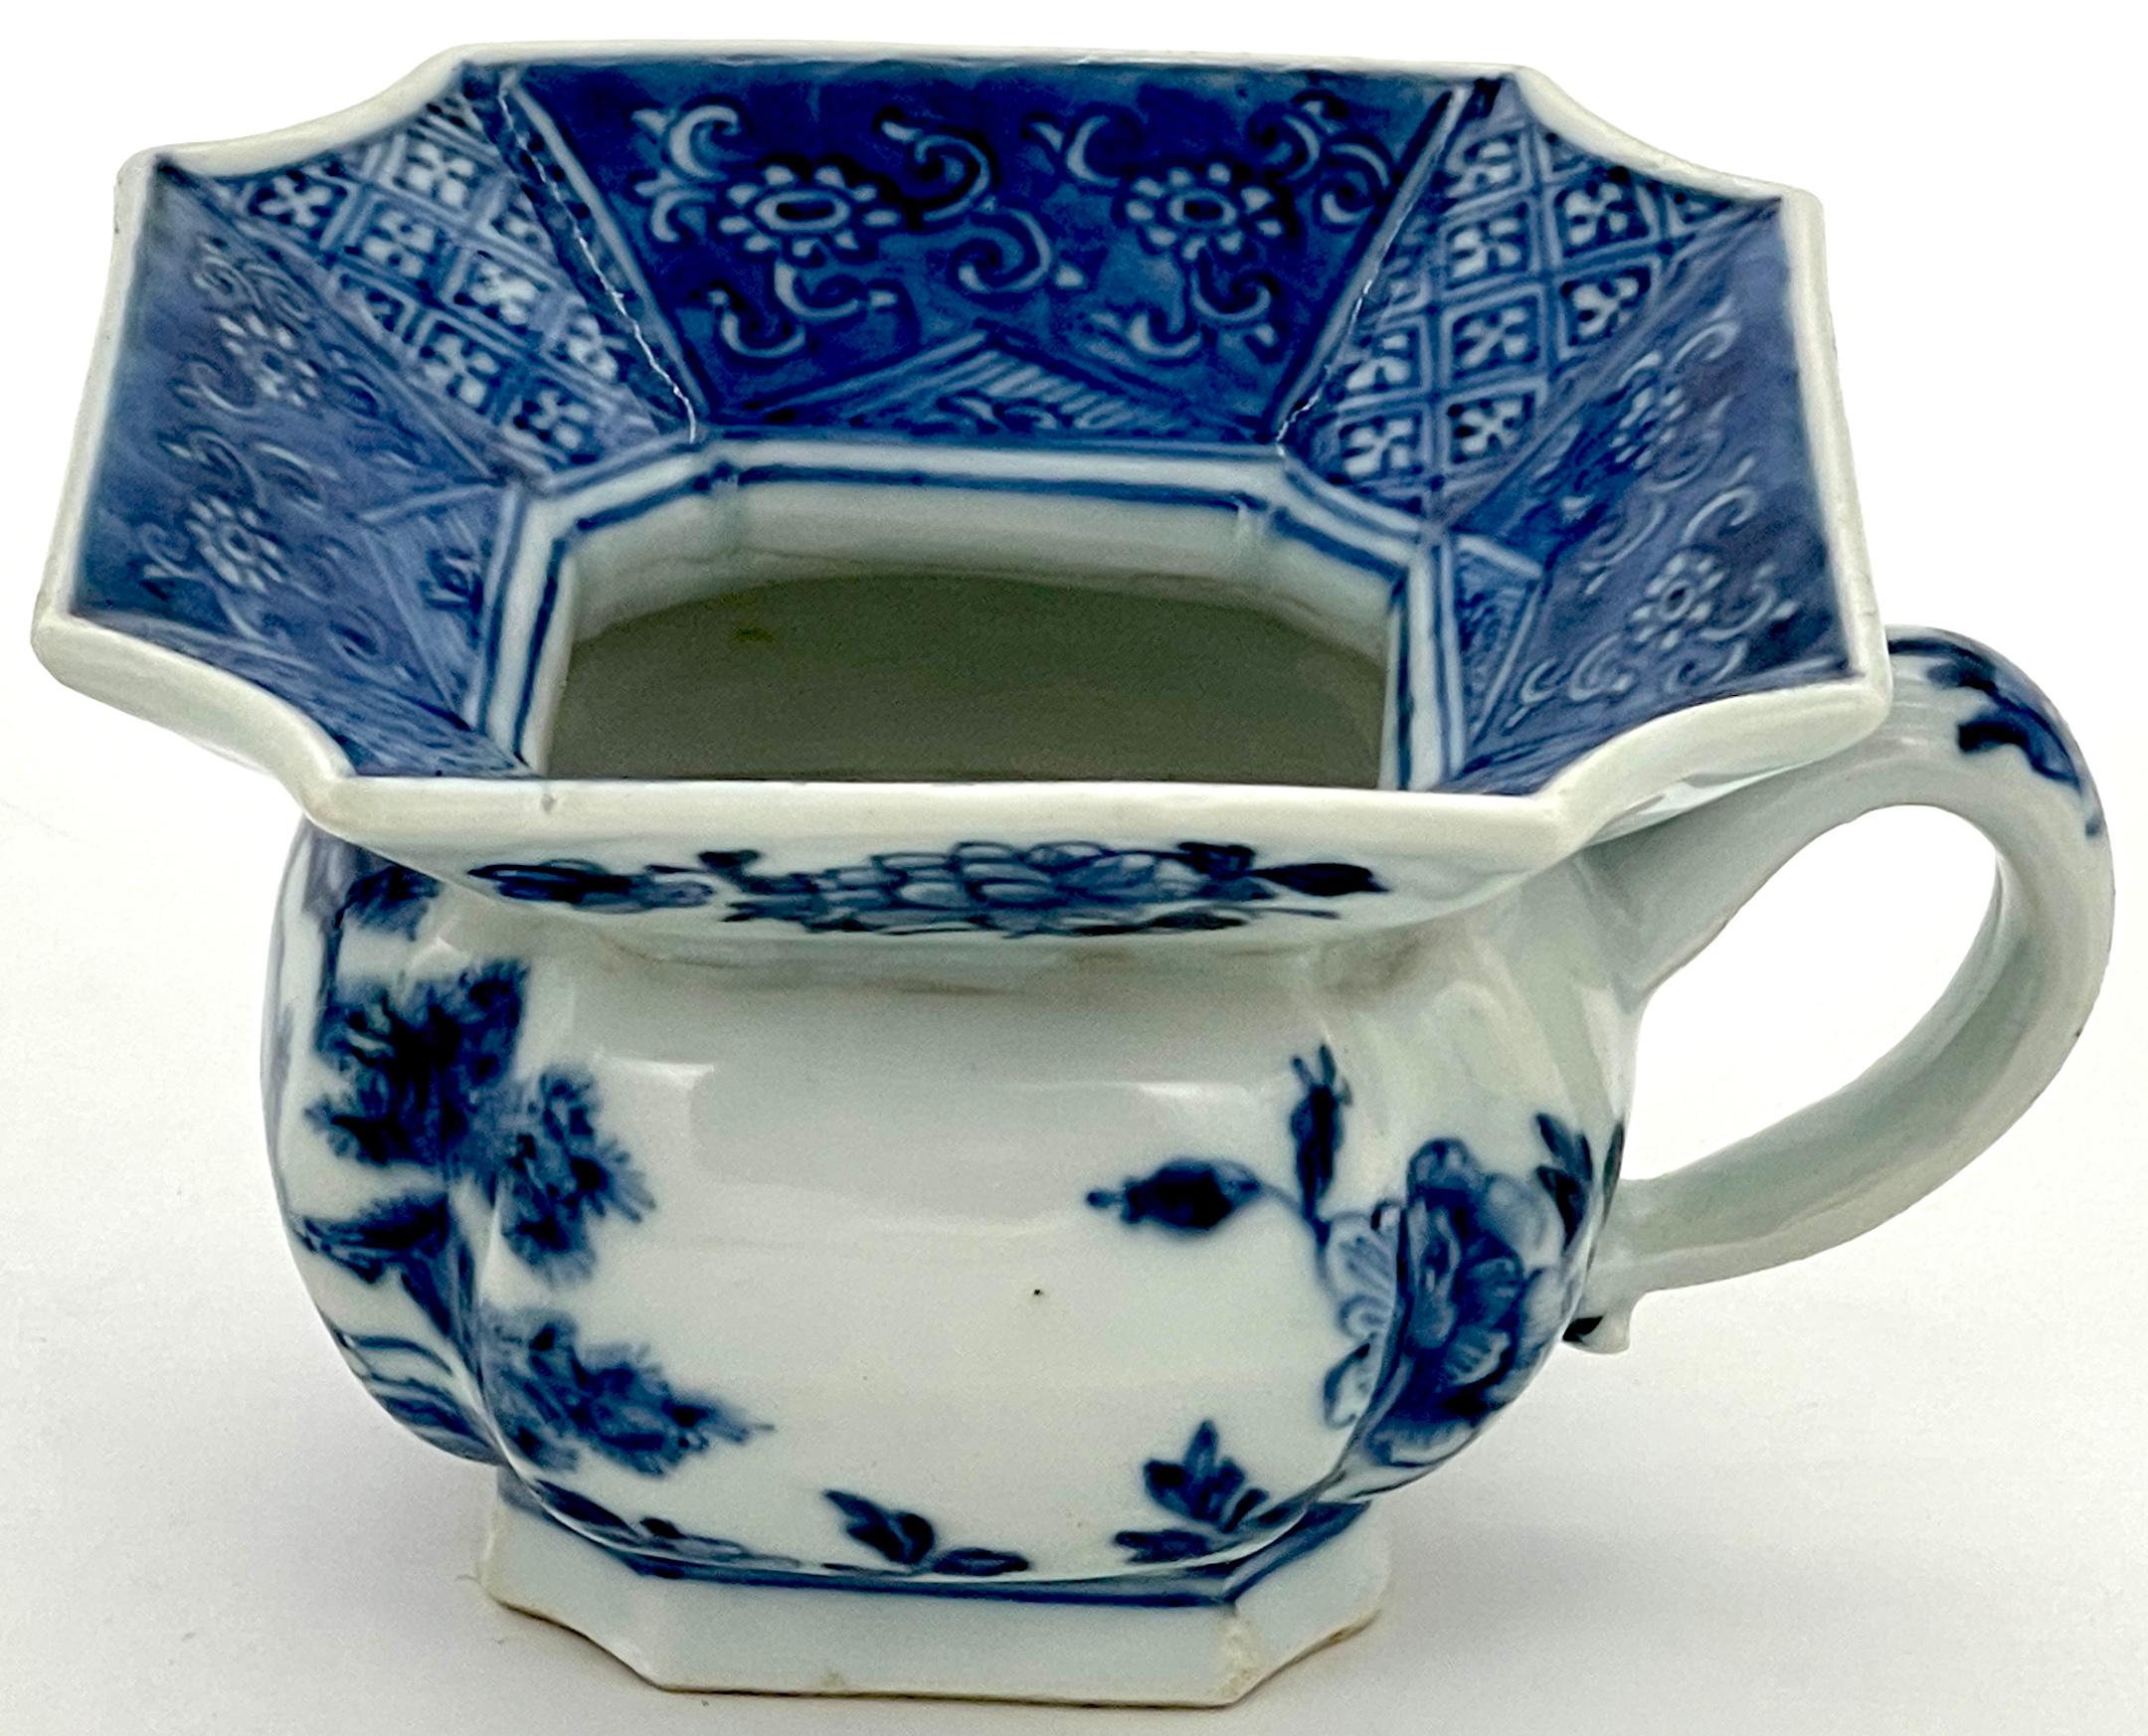 Chinese Blue and White Spittoon, Qing Dynasty, Kangxi Period
China, Circa 1700

An exquisite Chinese Blue and White Spittoon from the Qing Dynasty's Kangxi Period, showcasing the finest craftsmanship in porcelain. This rare and finely formed work